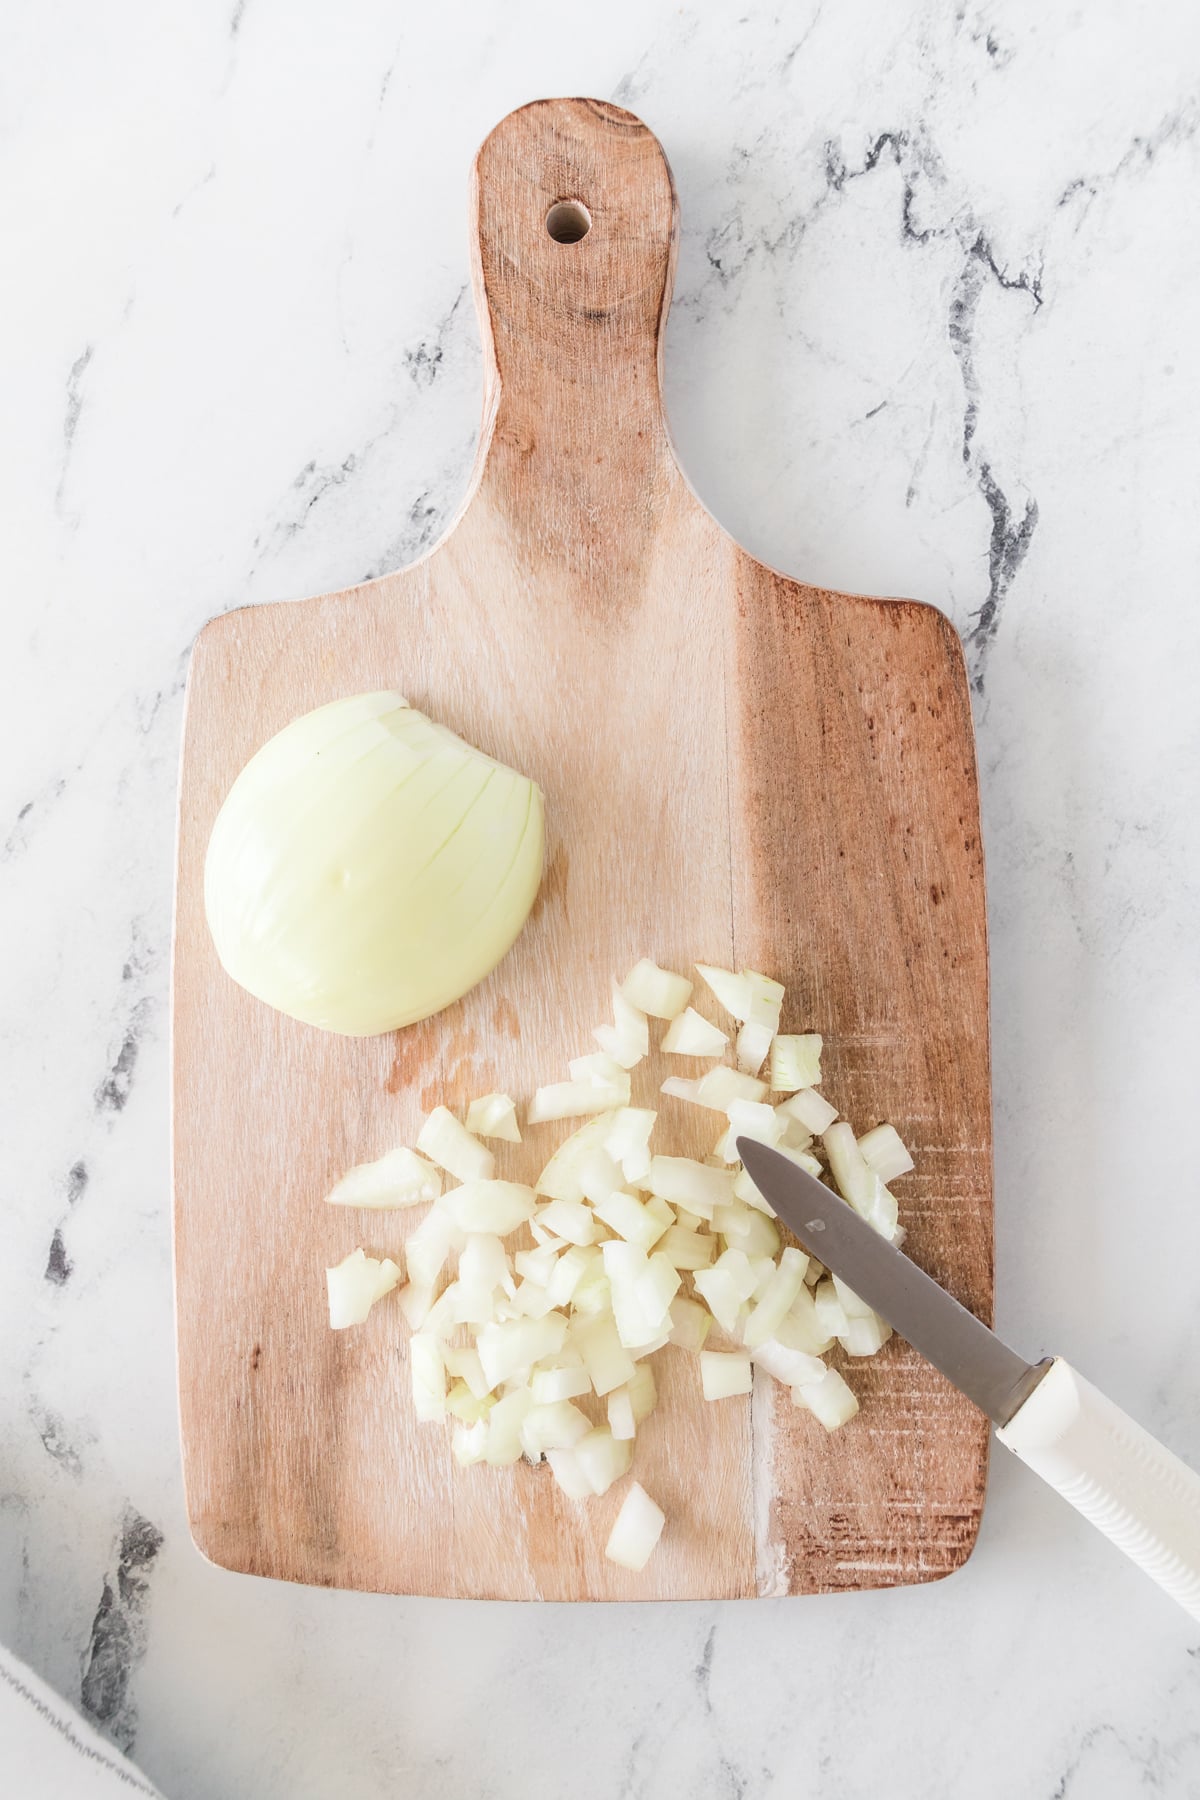 A whole onion on a cutting board next to a pile of diced onion.